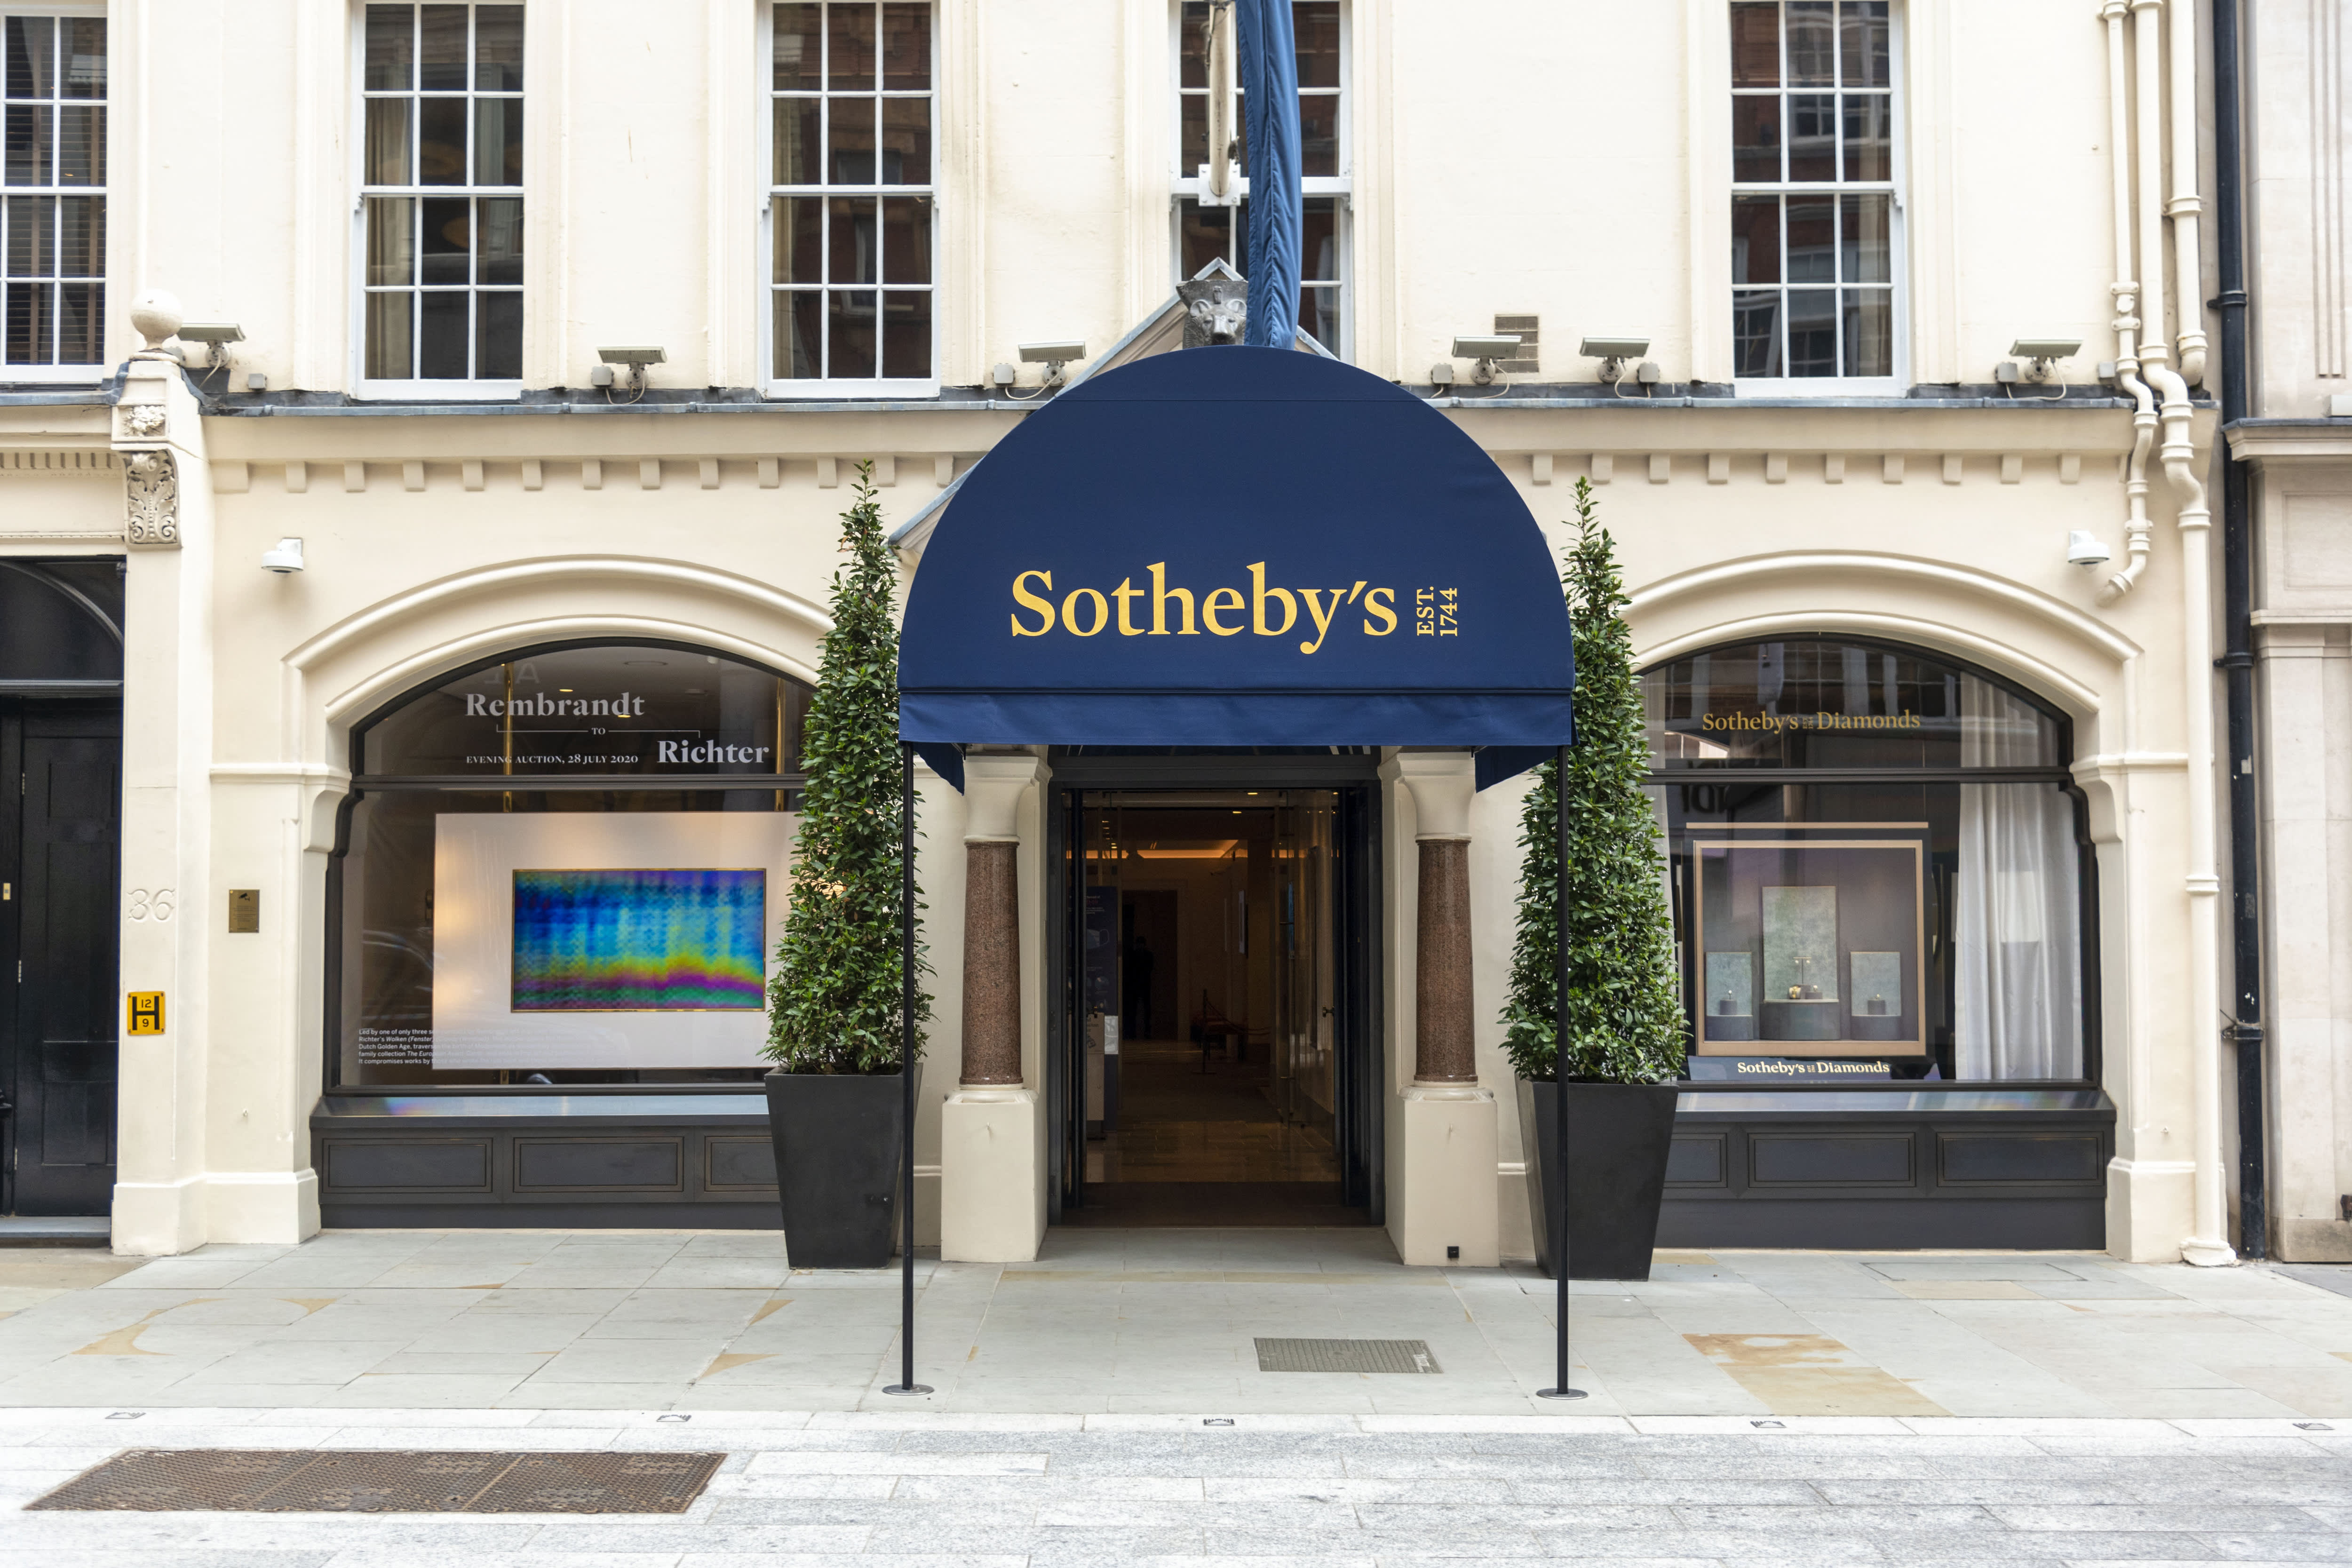 Sotheby’s enters the NFT world in collaboration with the digital artist Pak